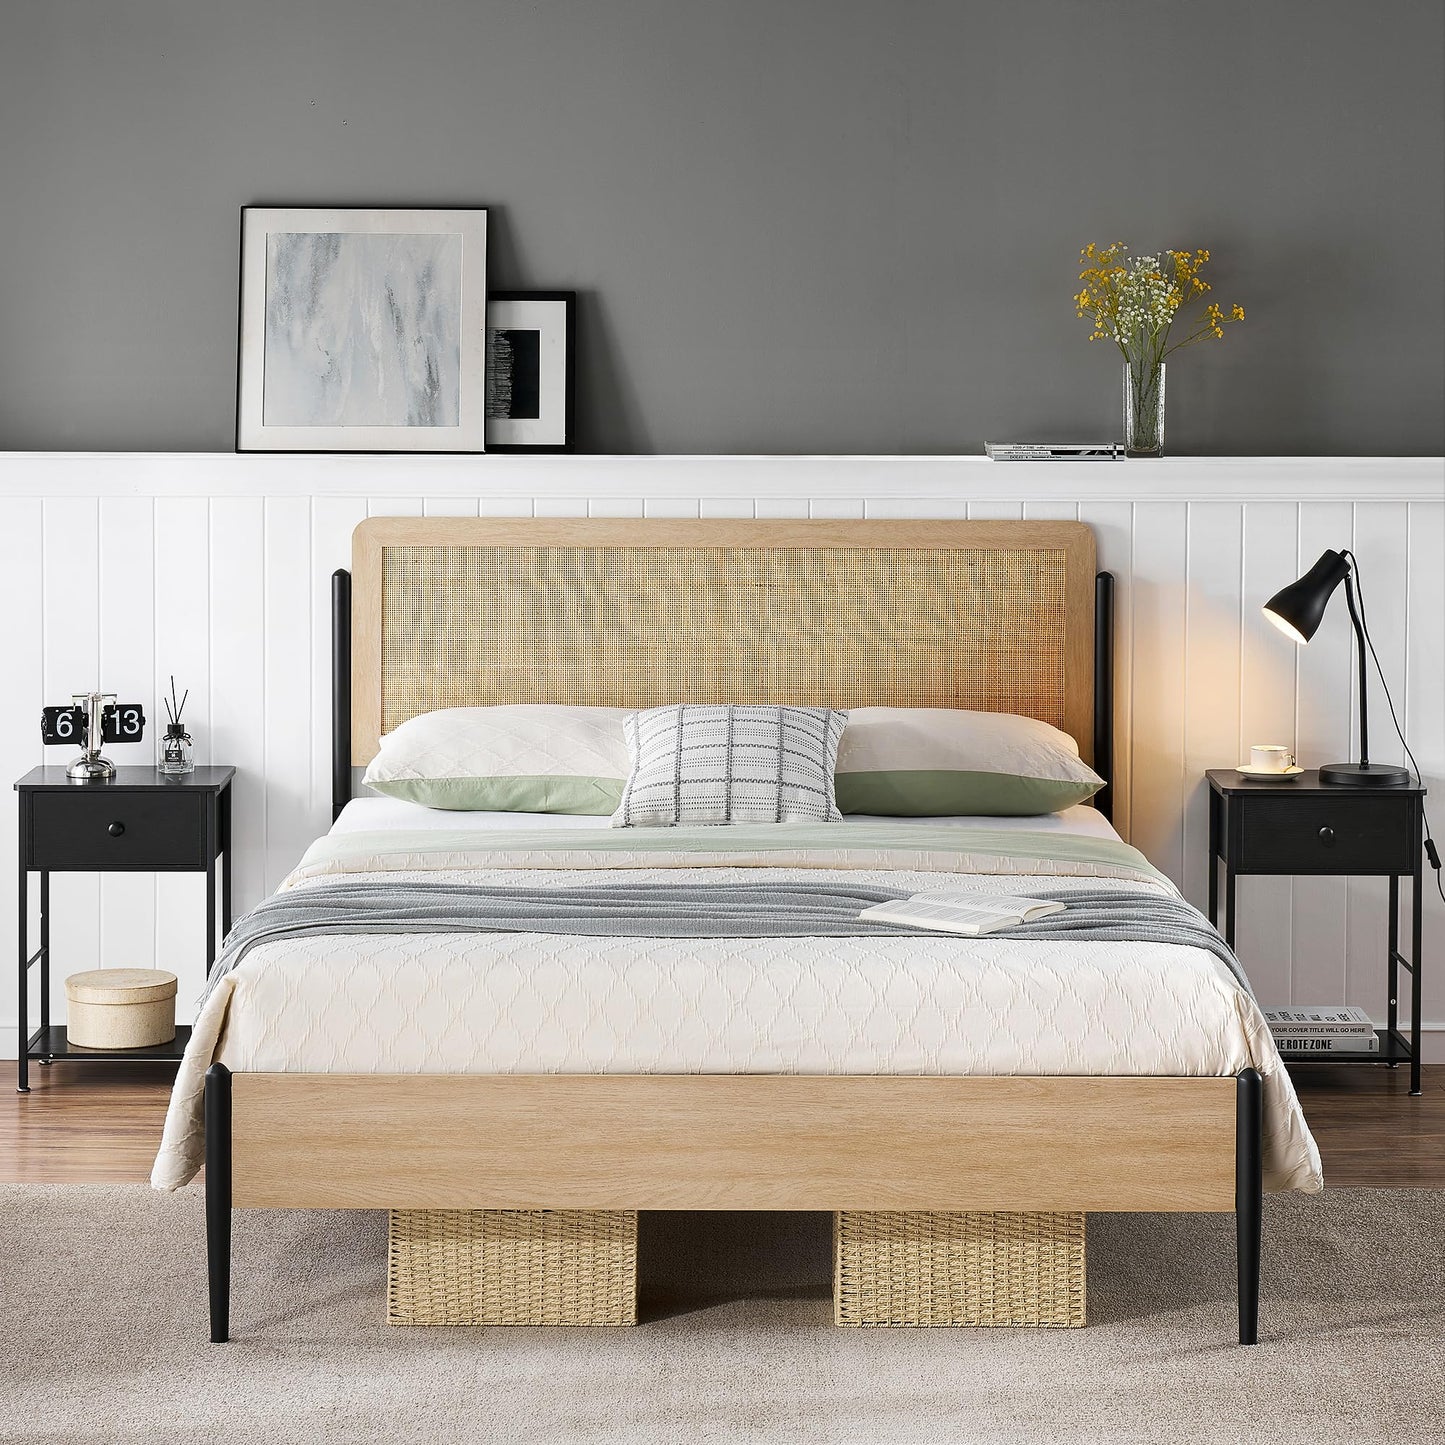 IDEALHOUSE Queen Size Bed Frame with Rattan Headboard, Platform Bed Frame with Safe Rounded Corners, Strong Metal Slats Support, Mattress Foundation,